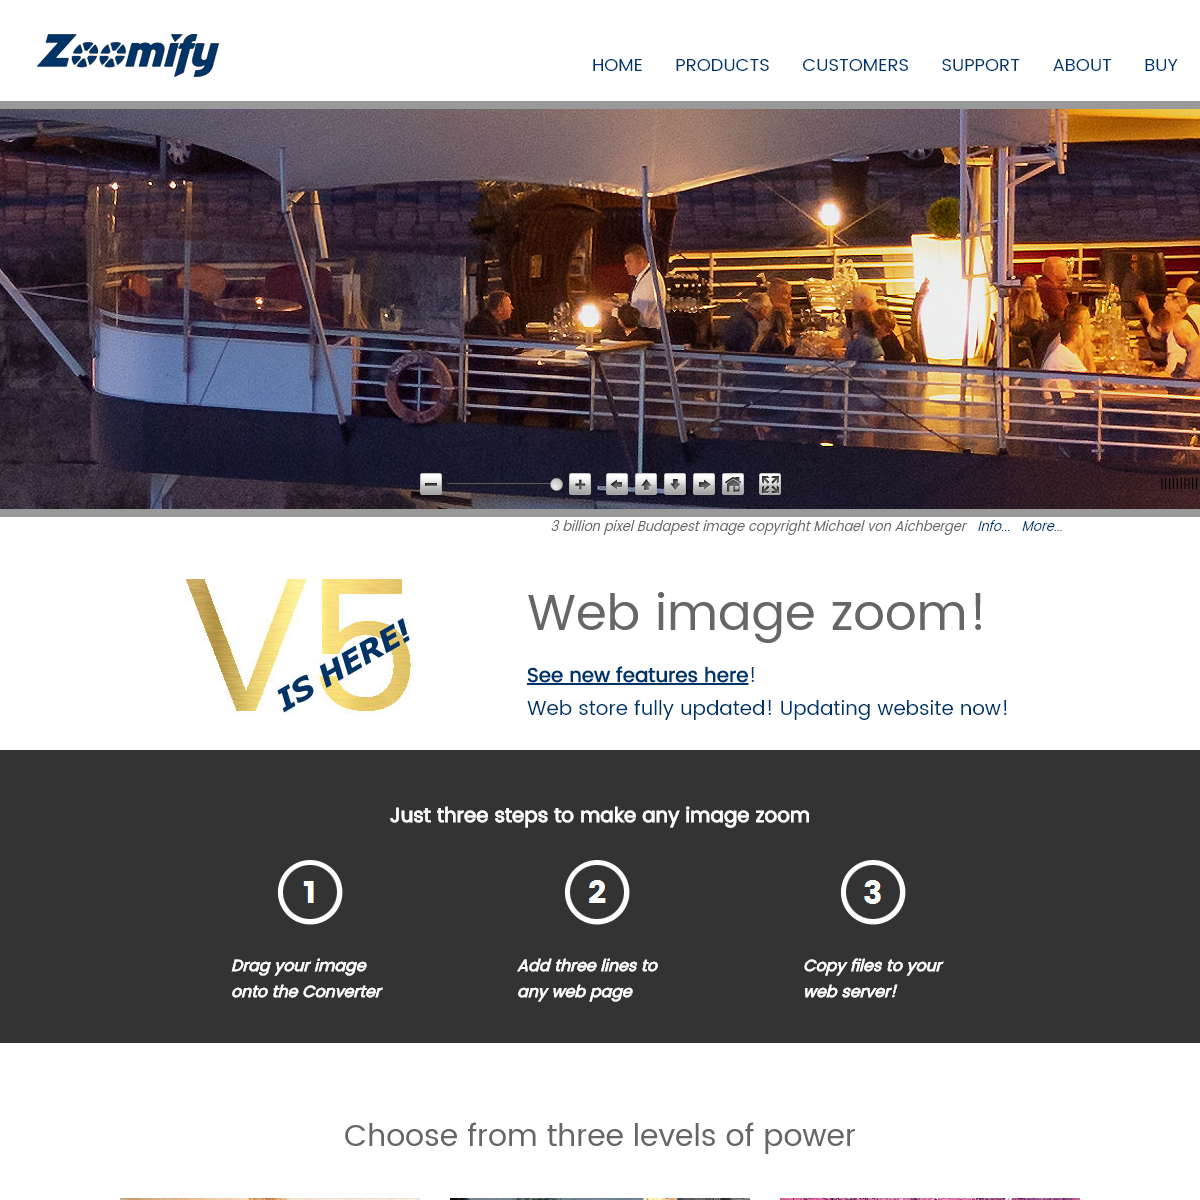 A complete backup of zoomify.com